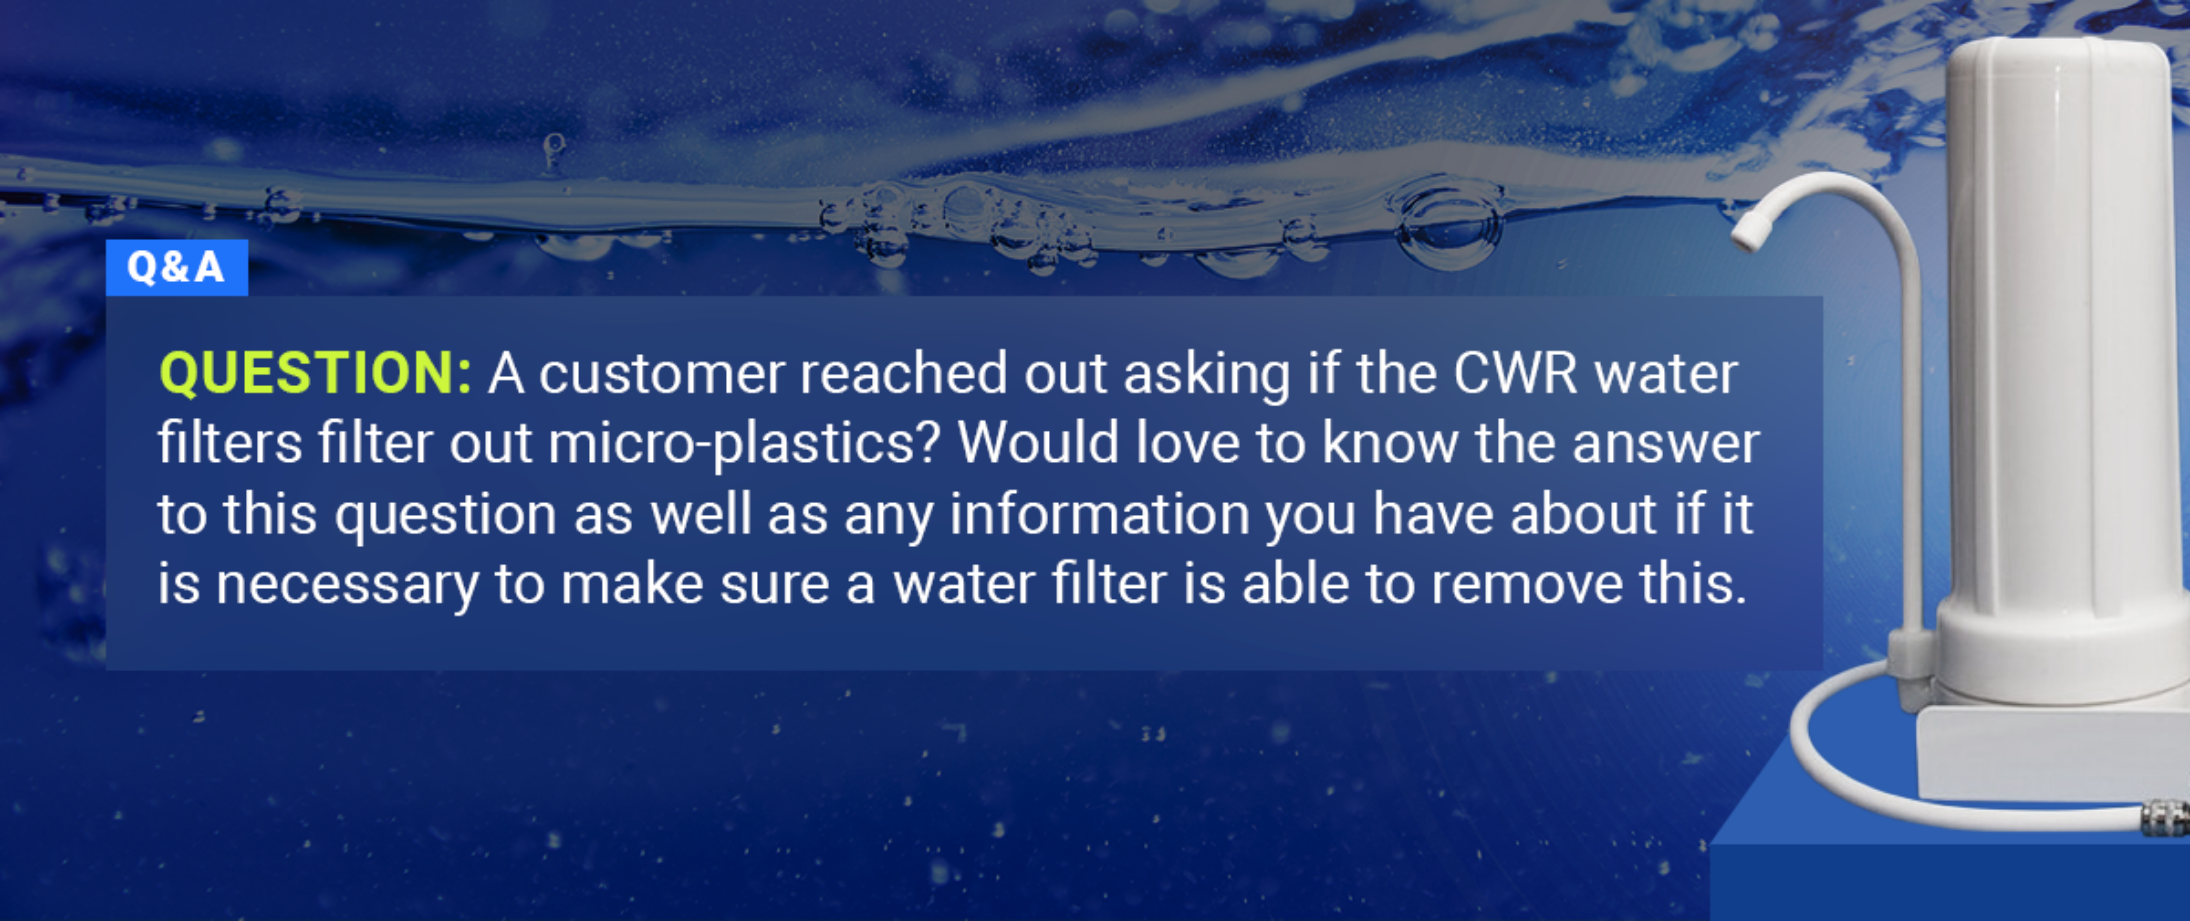 CWR water filters filter out micro-plastics